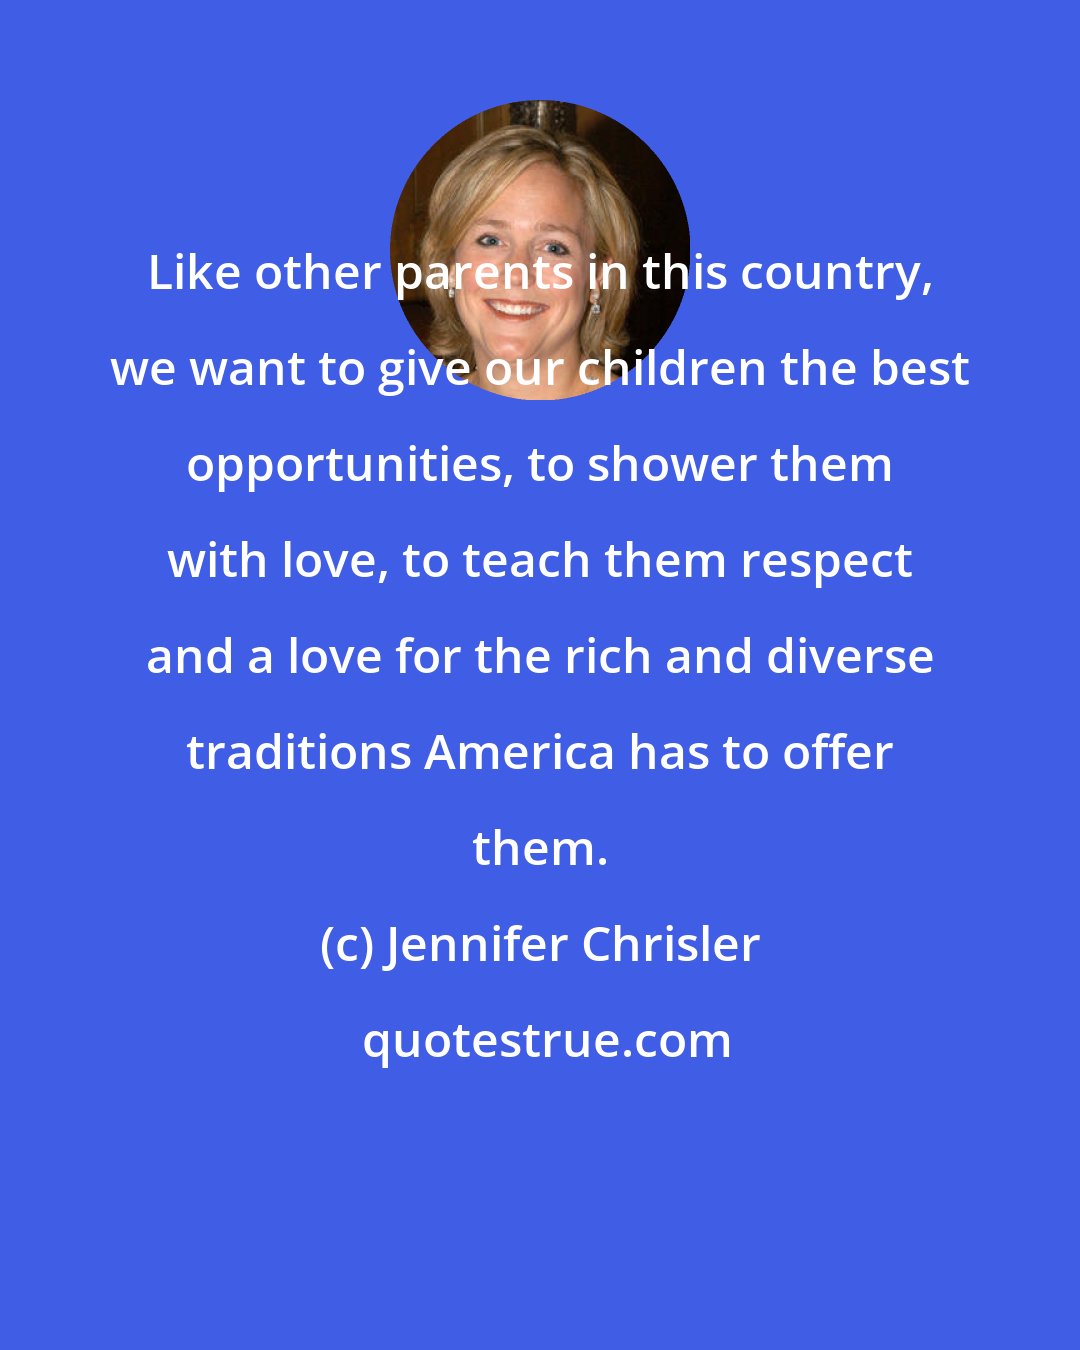 Jennifer Chrisler: Like other parents in this country, we want to give our children the best opportunities, to shower them with love, to teach them respect and a love for the rich and diverse traditions America has to offer them.